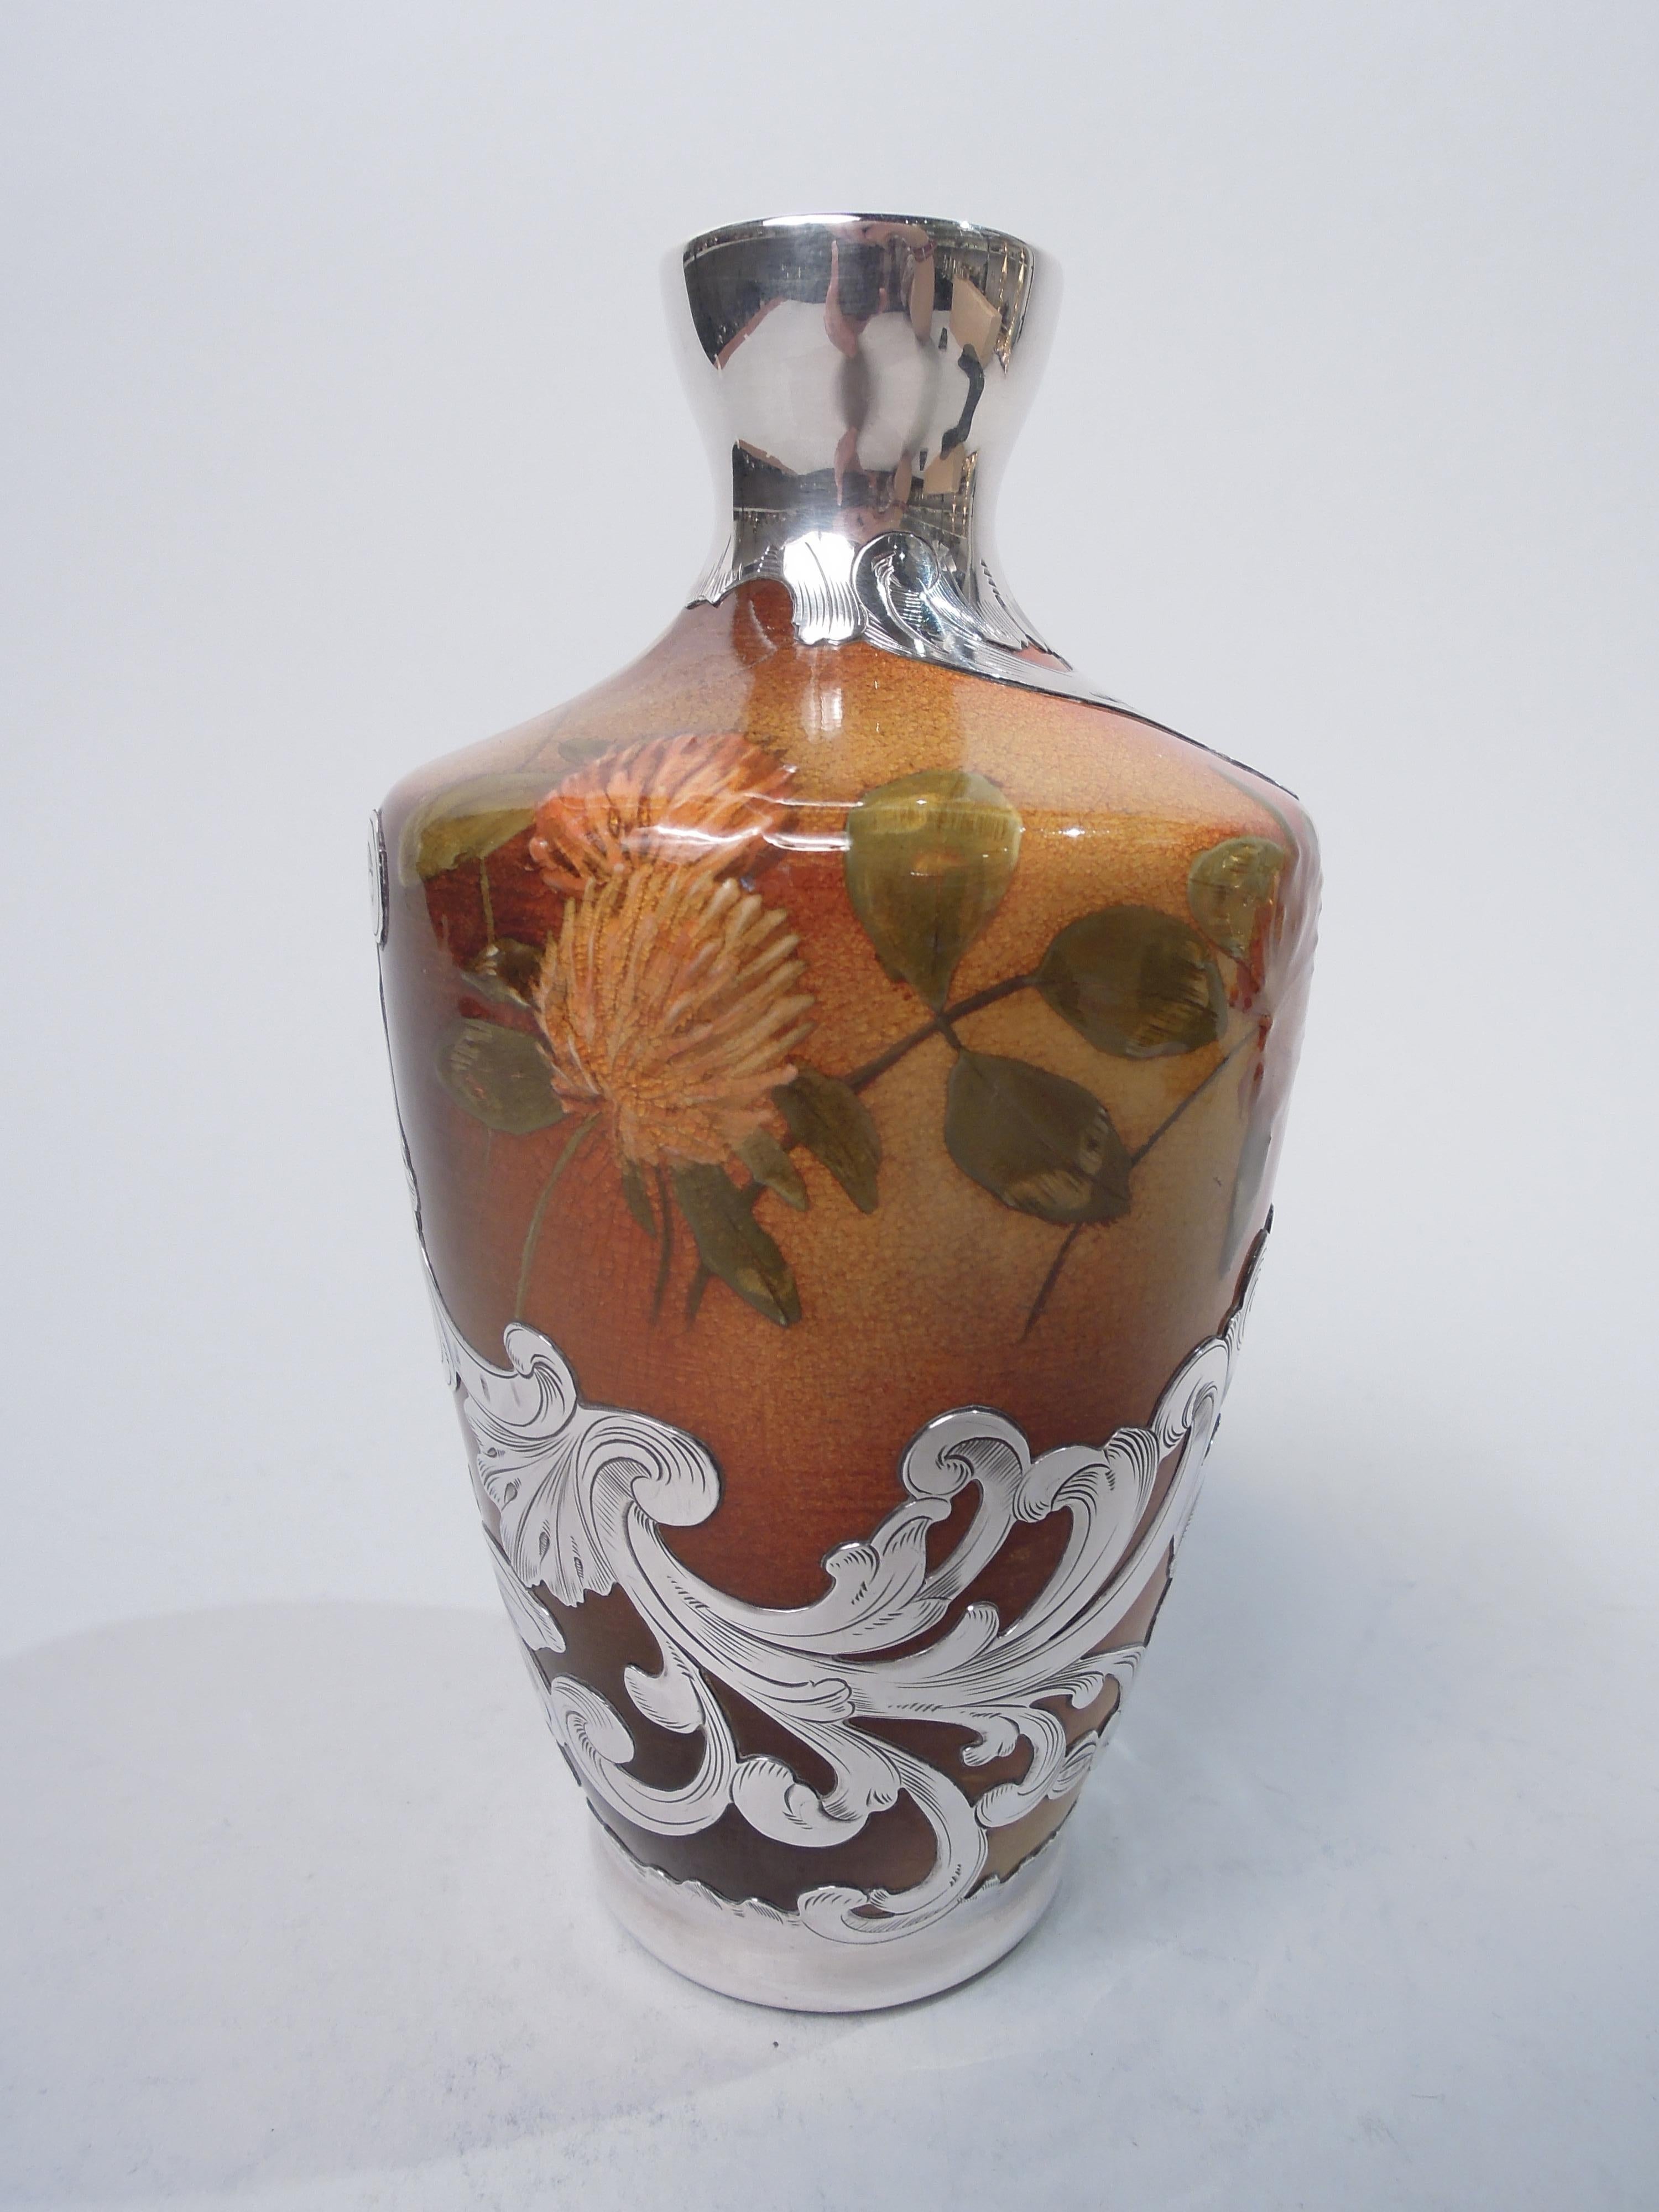 Art Nouveau Craftsman glazed earthenware vase. Made by Rookwood Pottery in Cincinnati in 1892. Tapering sides white shoulder and short neck in silver collar. Painted clover on shaded yellow orange ground. Spare scattered wildflowers contrasting with